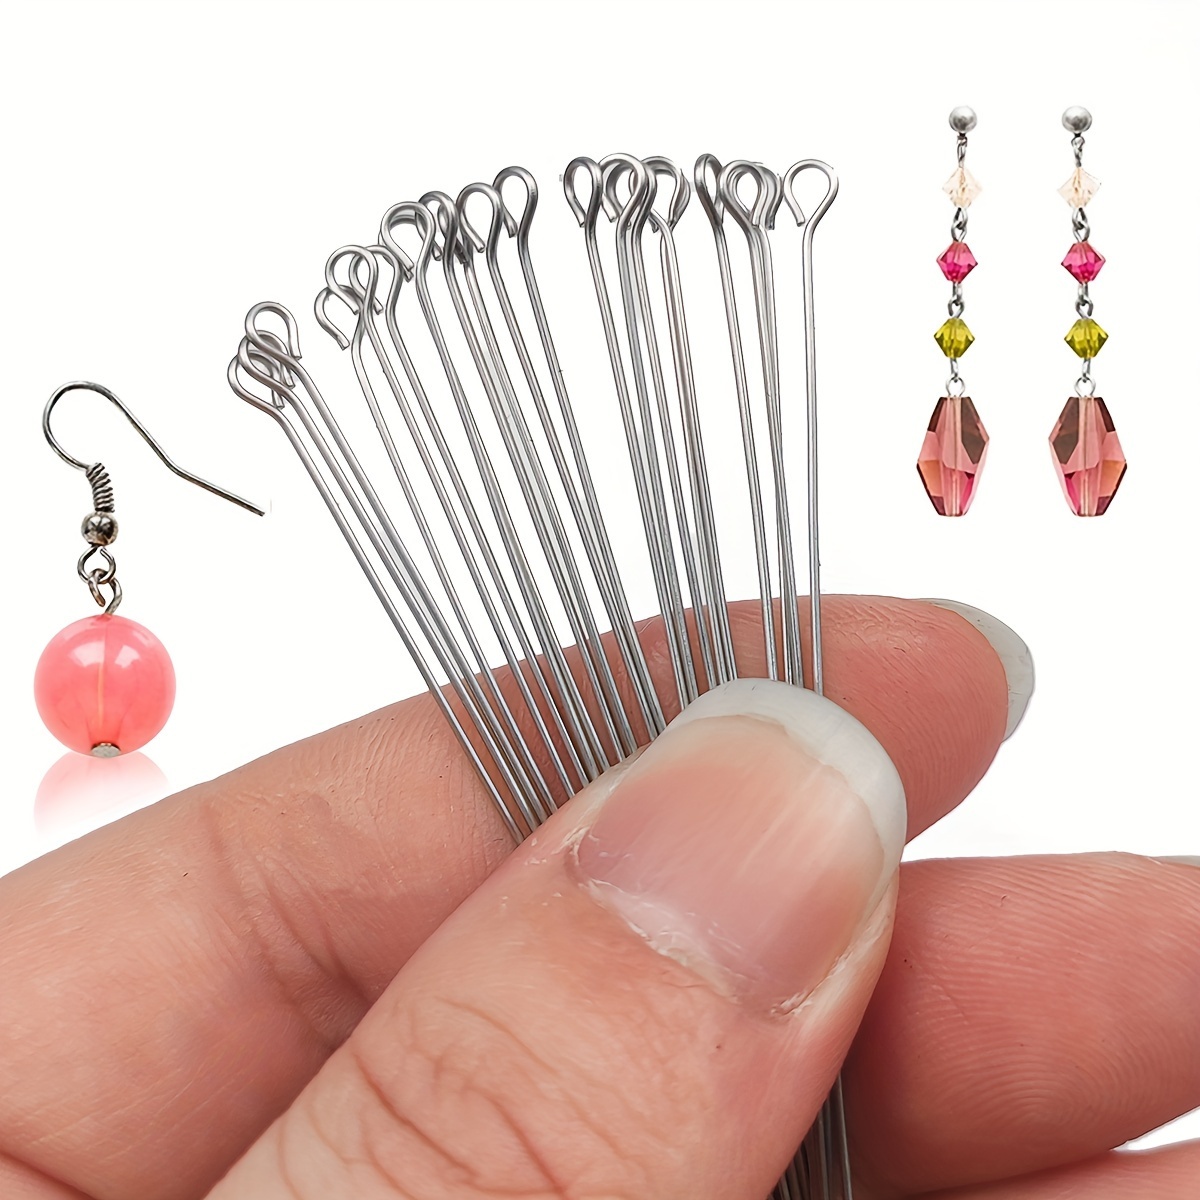 

200pcs/pack Stainless Steel Nine-pin Needle, About 20-70mm Long, Bendable Eye Pins For Diy Bracelets, Necklaces, Earrings, Hairpins, Jewelry, Handmade Material Accessories